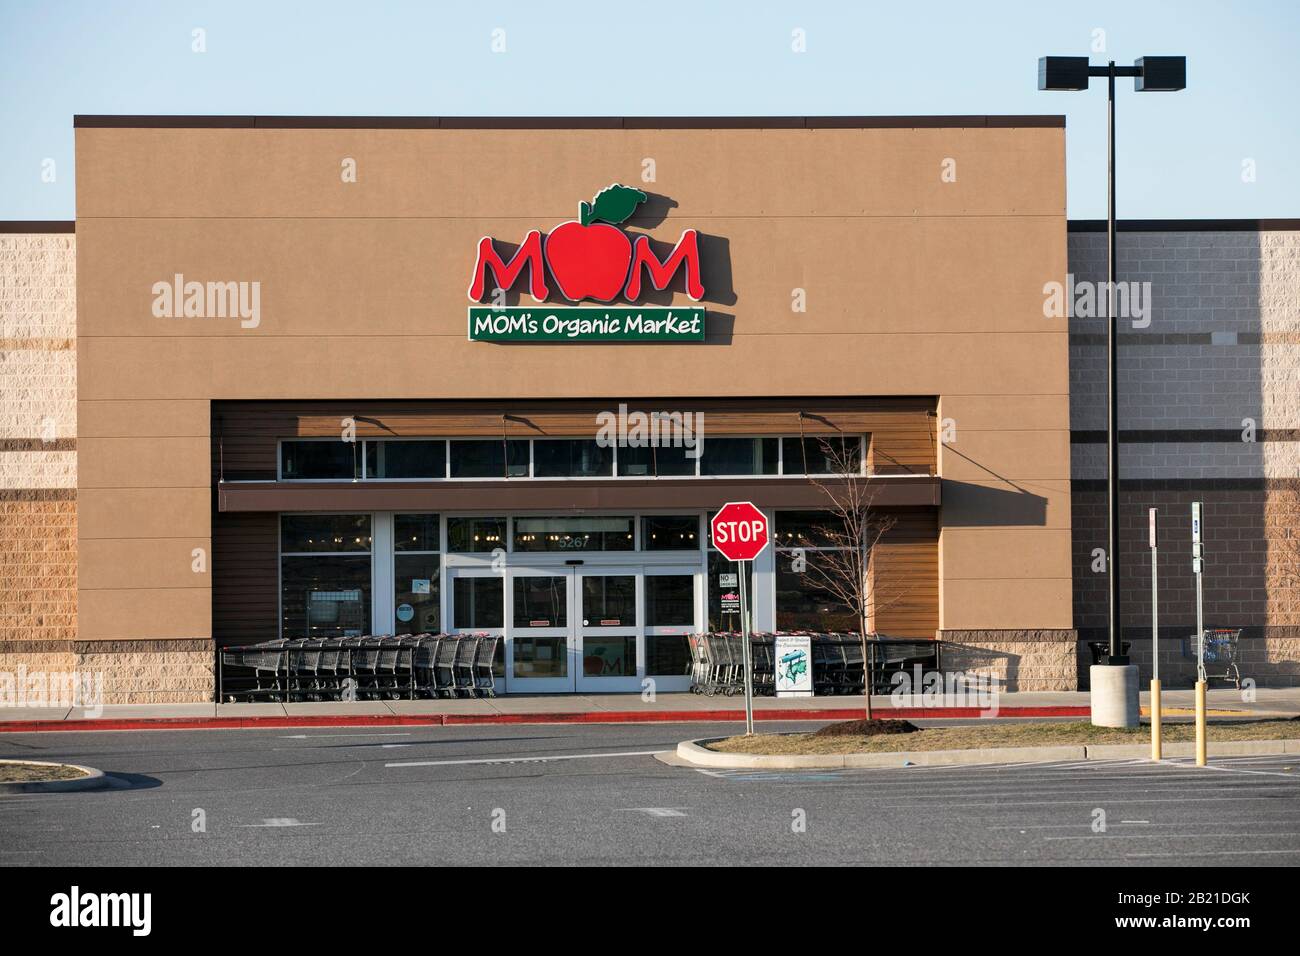 A logo sign outside of a MOM's Organic Market retail grocery store location in Nottingham, Maryland on February 22, 2020. Stock Photo